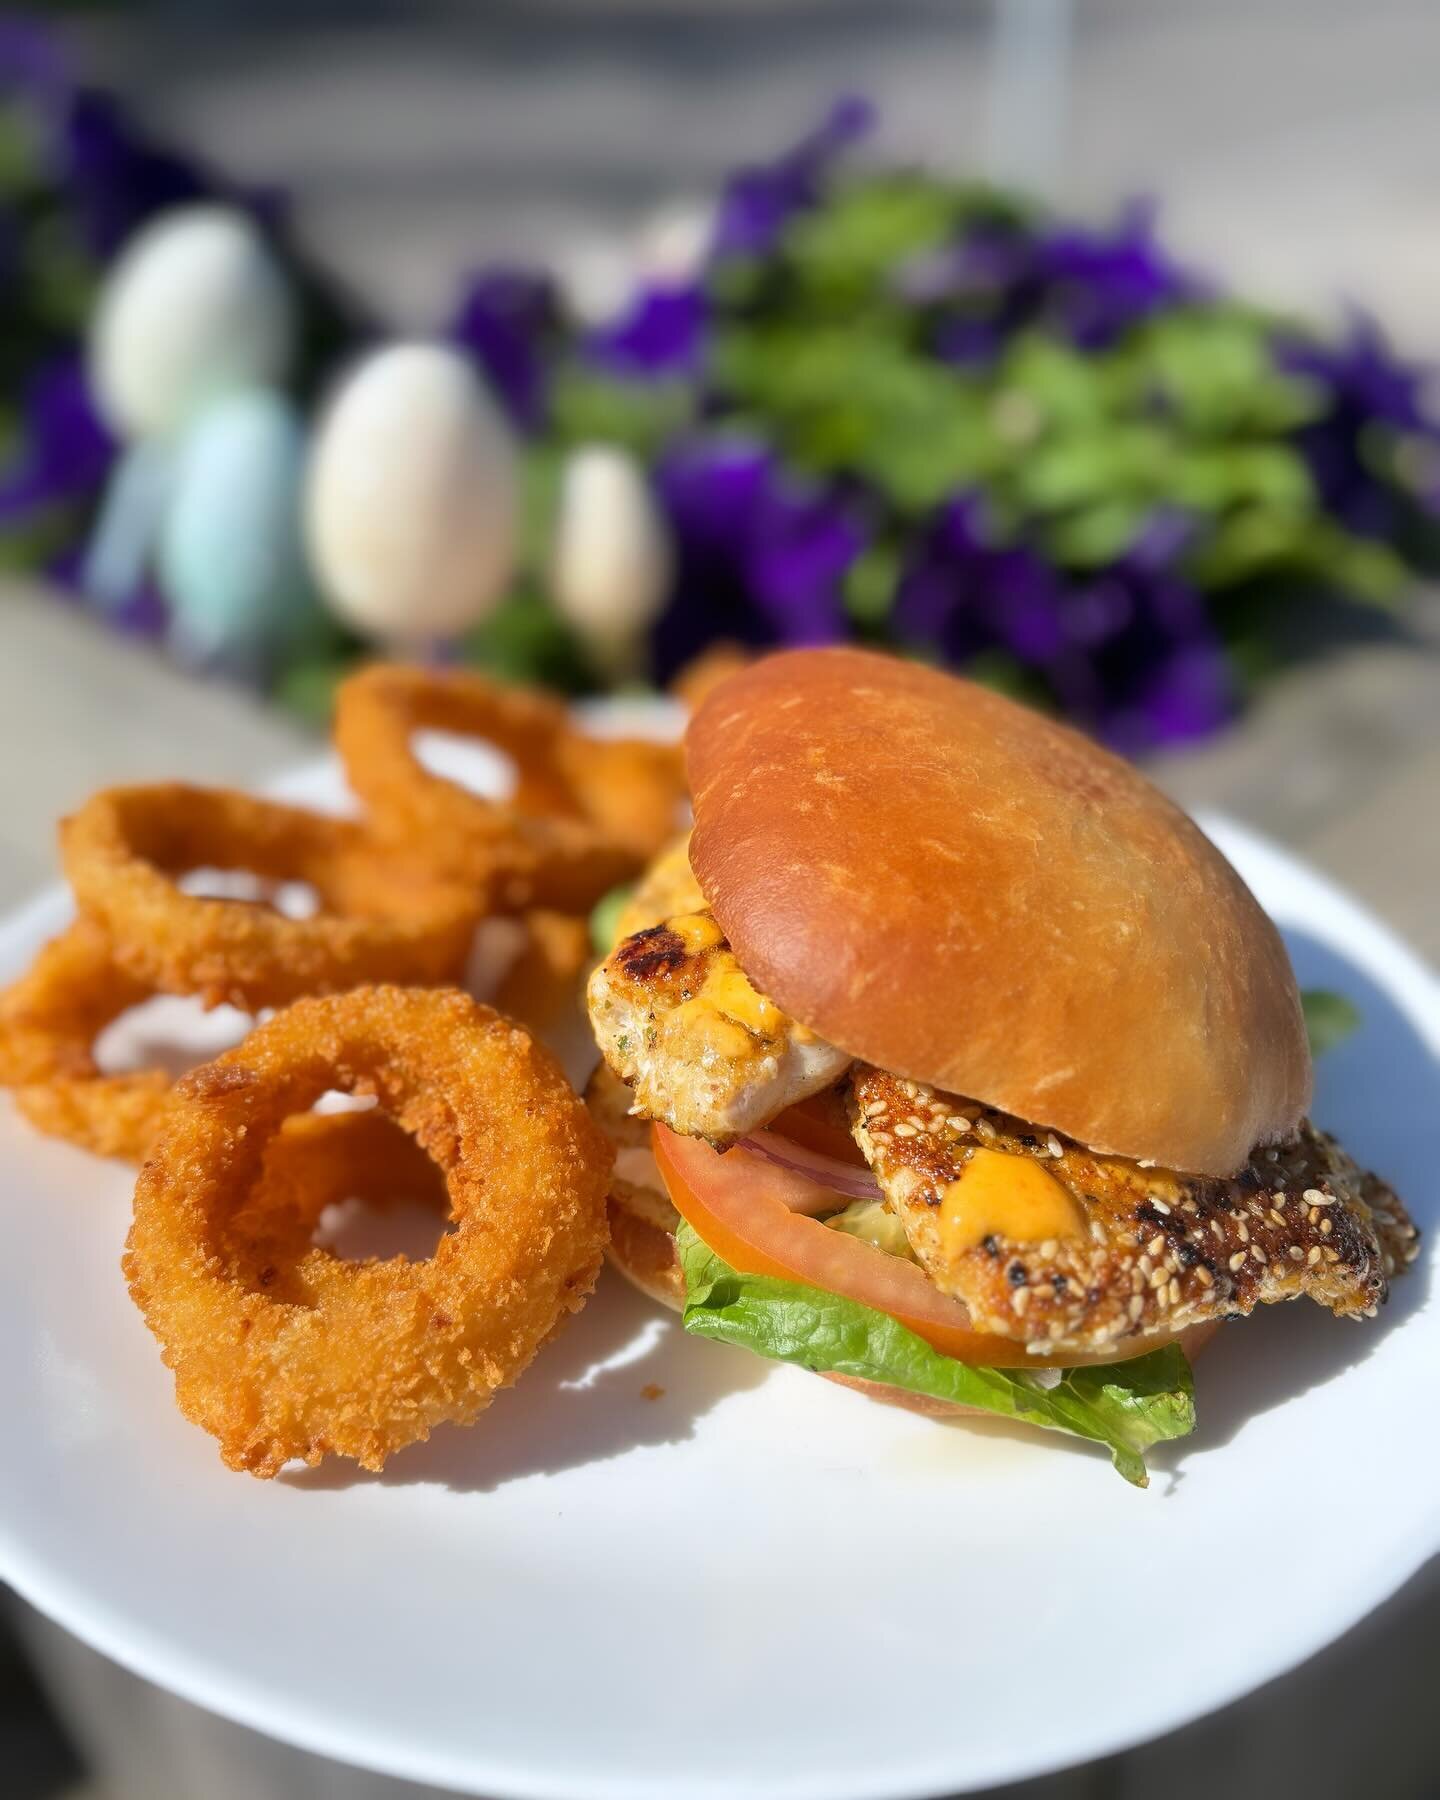 Special of the day : Sesame encrusted, Amber Jack sandwich. With choice of side . #warehousebakeryanddonuts #saturday #spring #fishsandwich #easter #fairhope #fairhopealabama #sweethomealabama